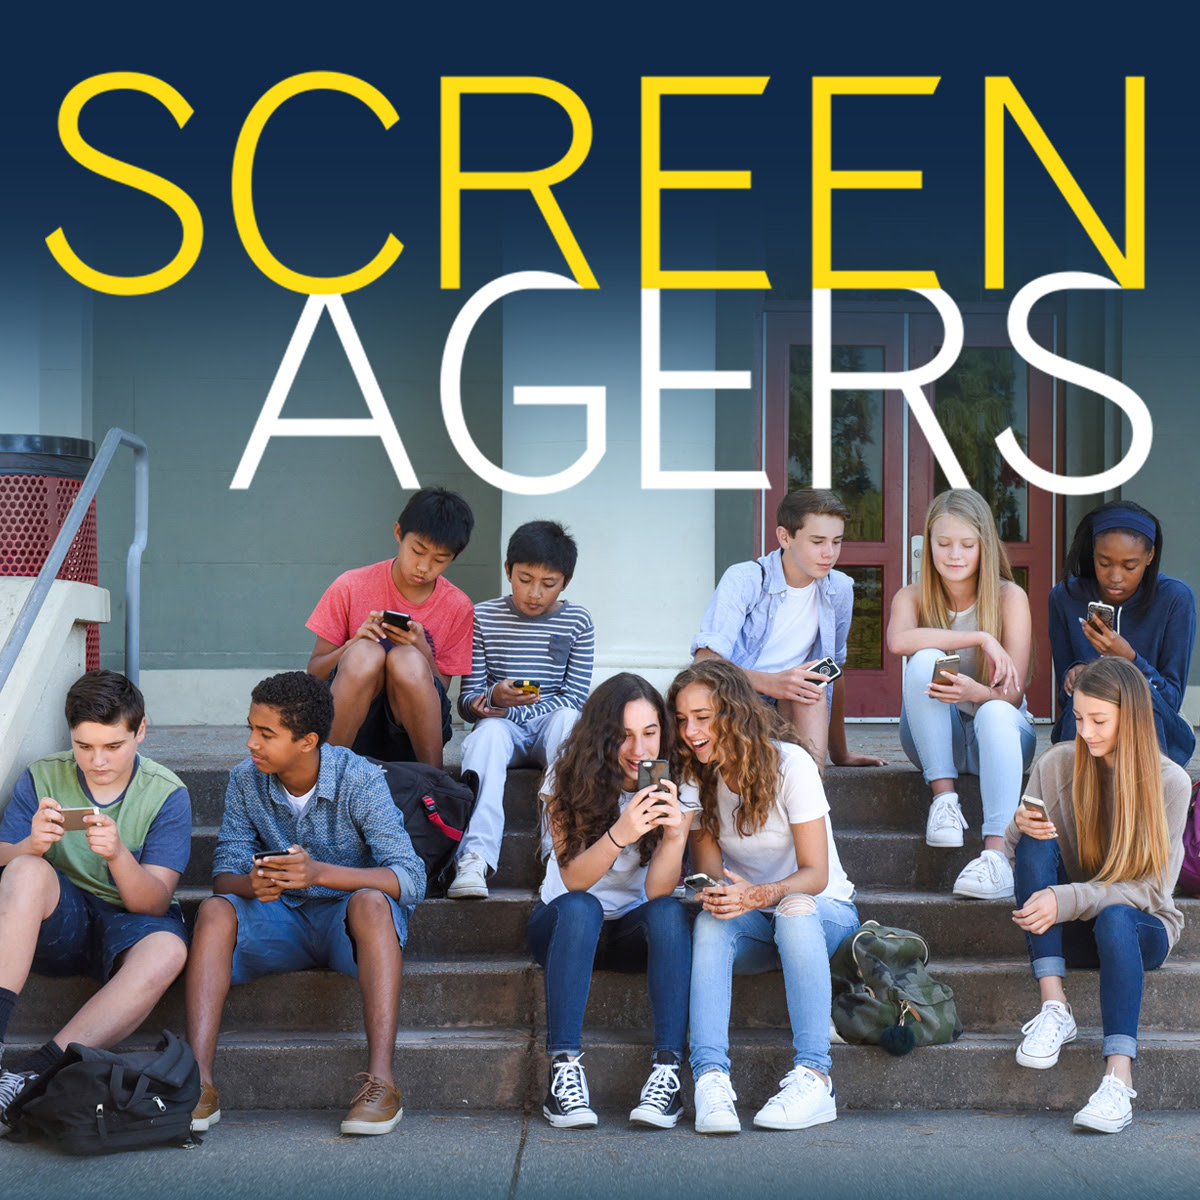 Screenagers Film Presented By South Tahoe Viking Boosters Club